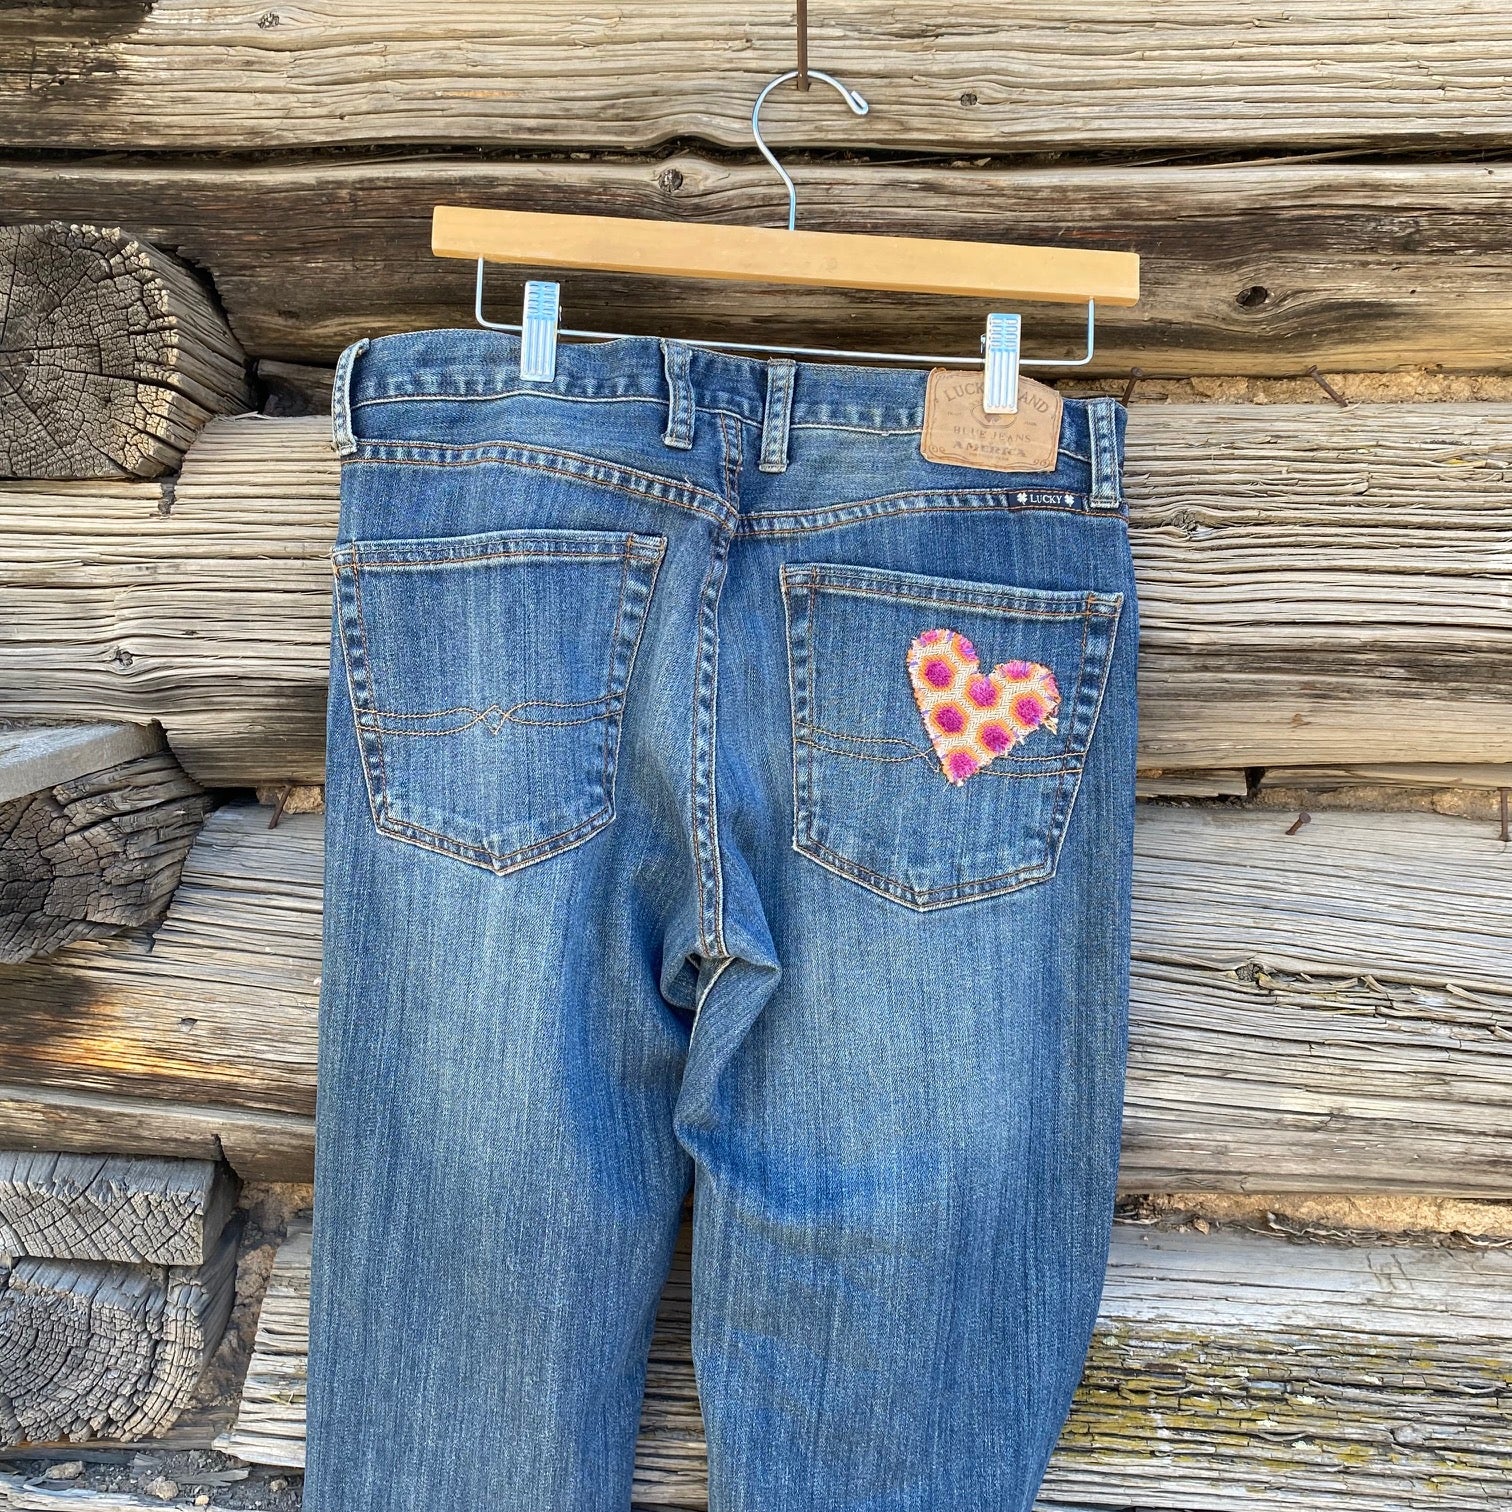 Tessa "Hand Me Downs" Upcycled Lucky Brand size 31 Sale 50% off – Tessa Clogs / Swedish Clog Cabin